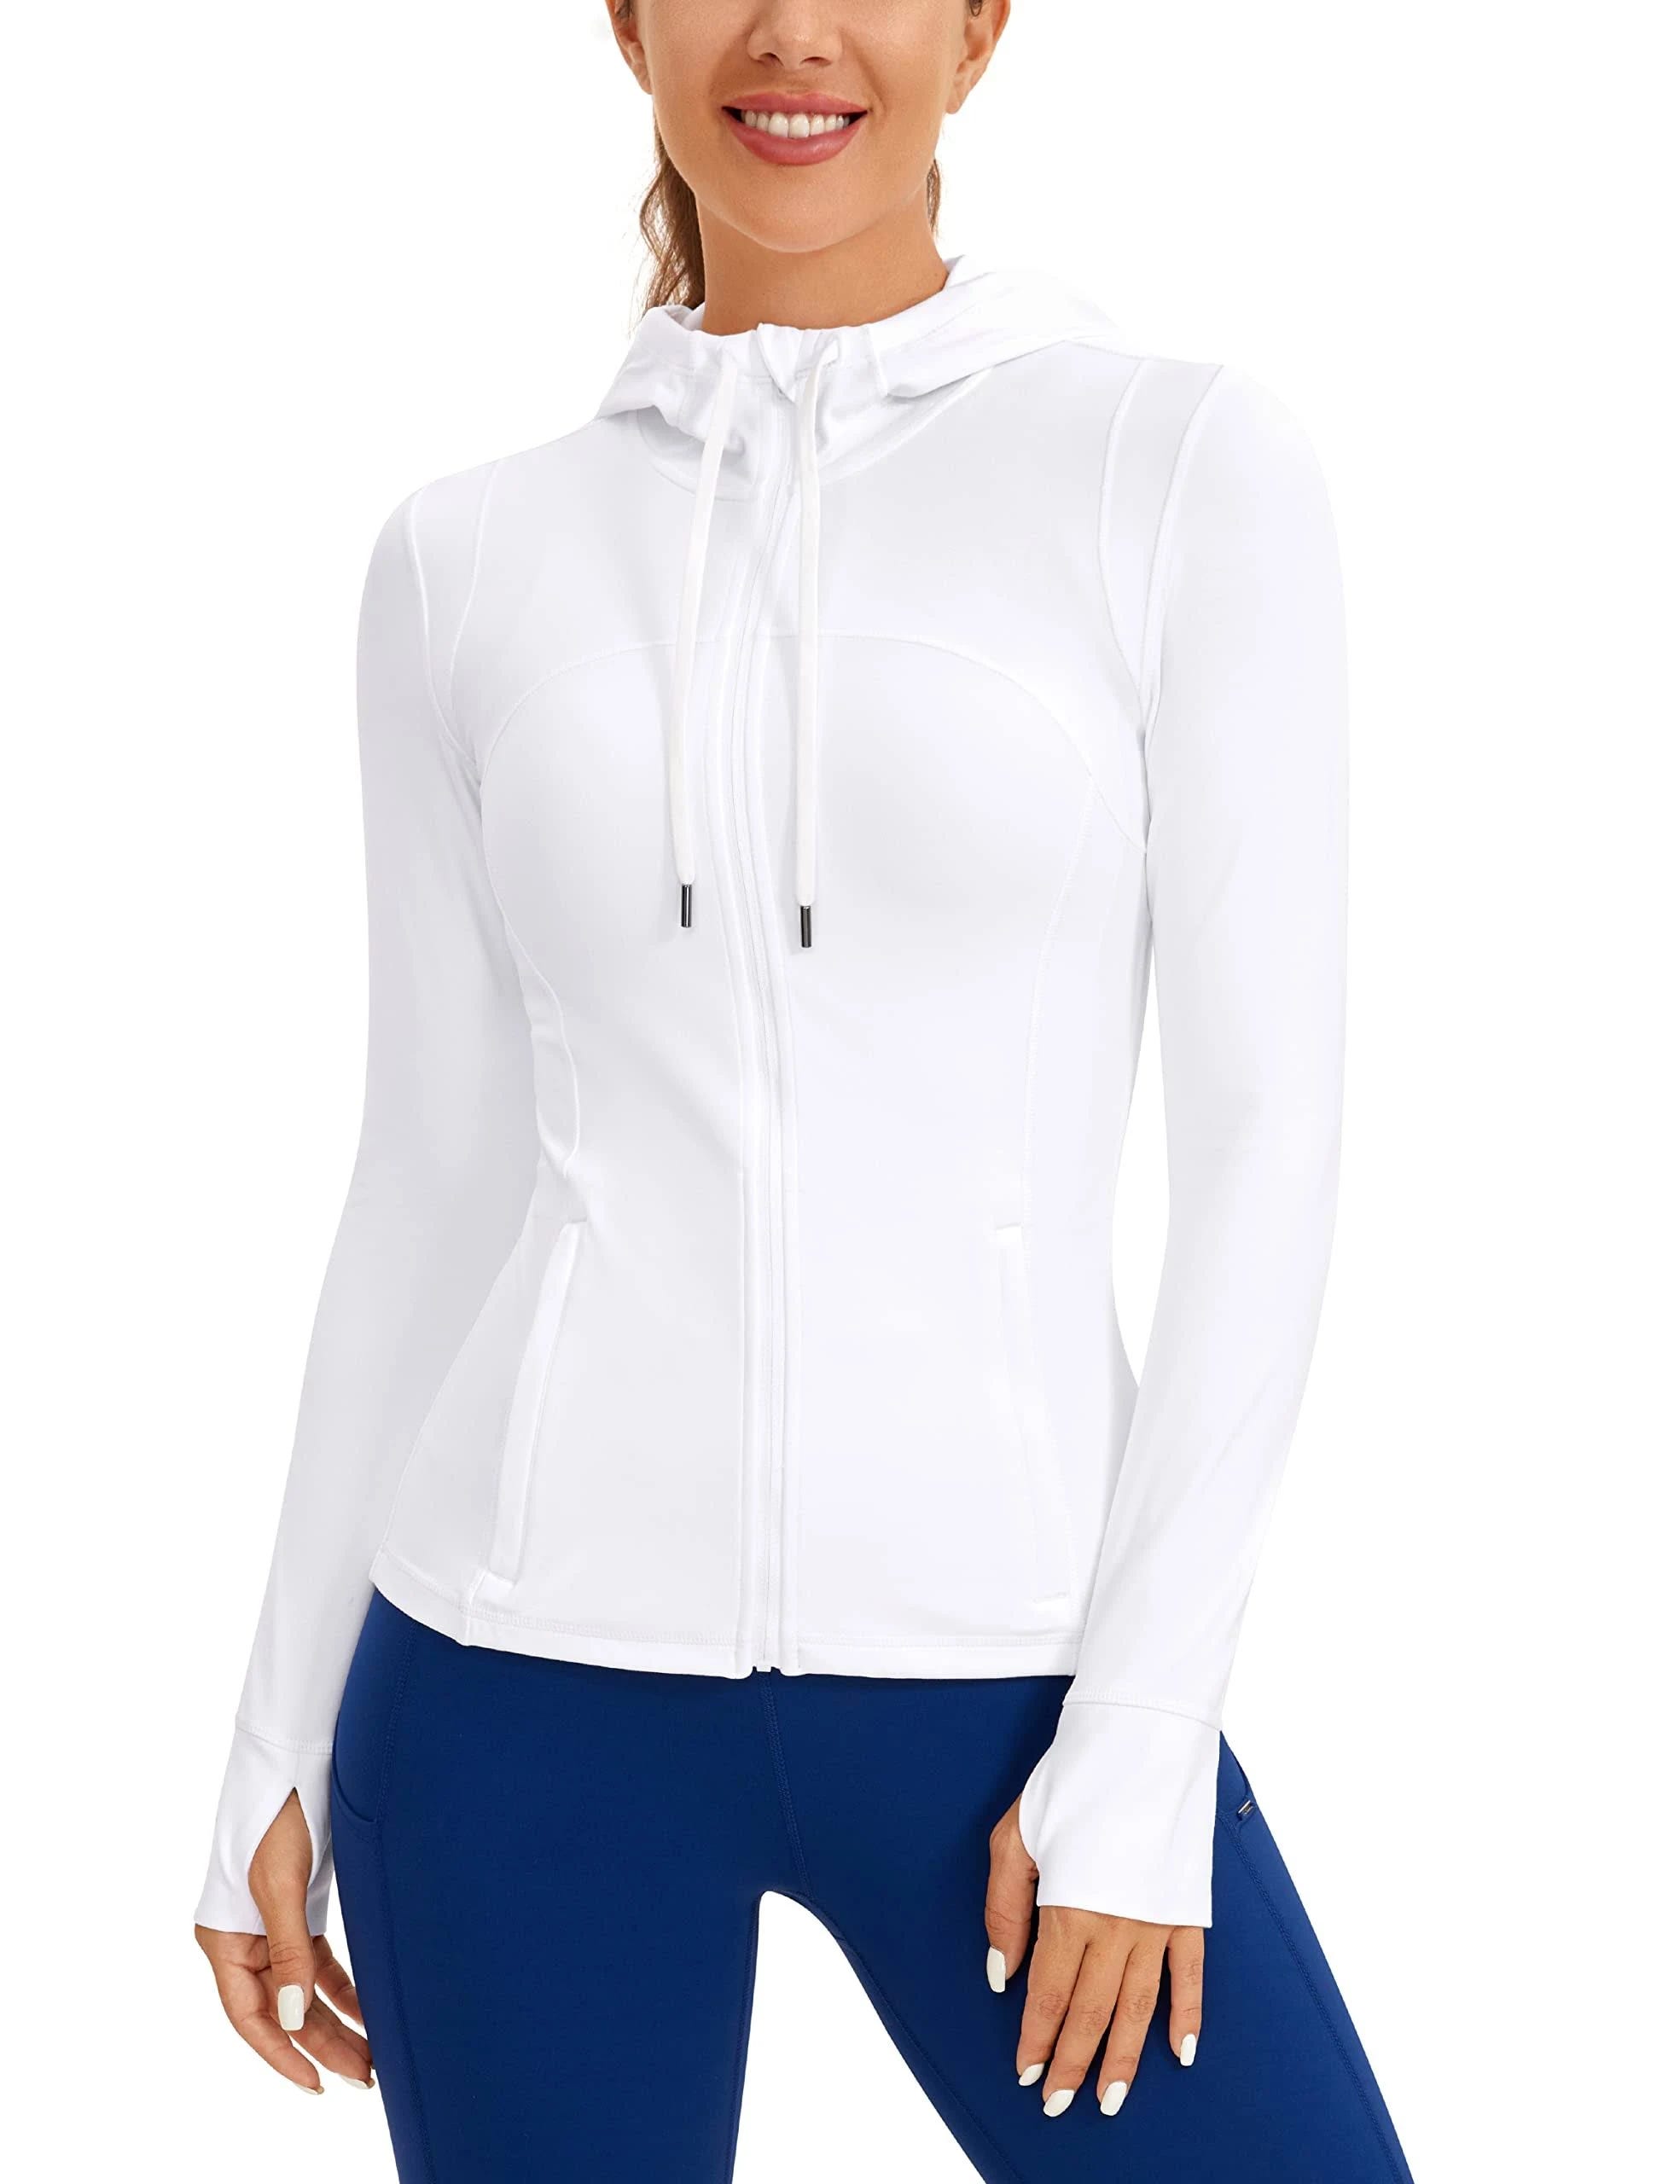 Butterluxe Slim Fit Jacket with Pocket and Hood for Women | Image